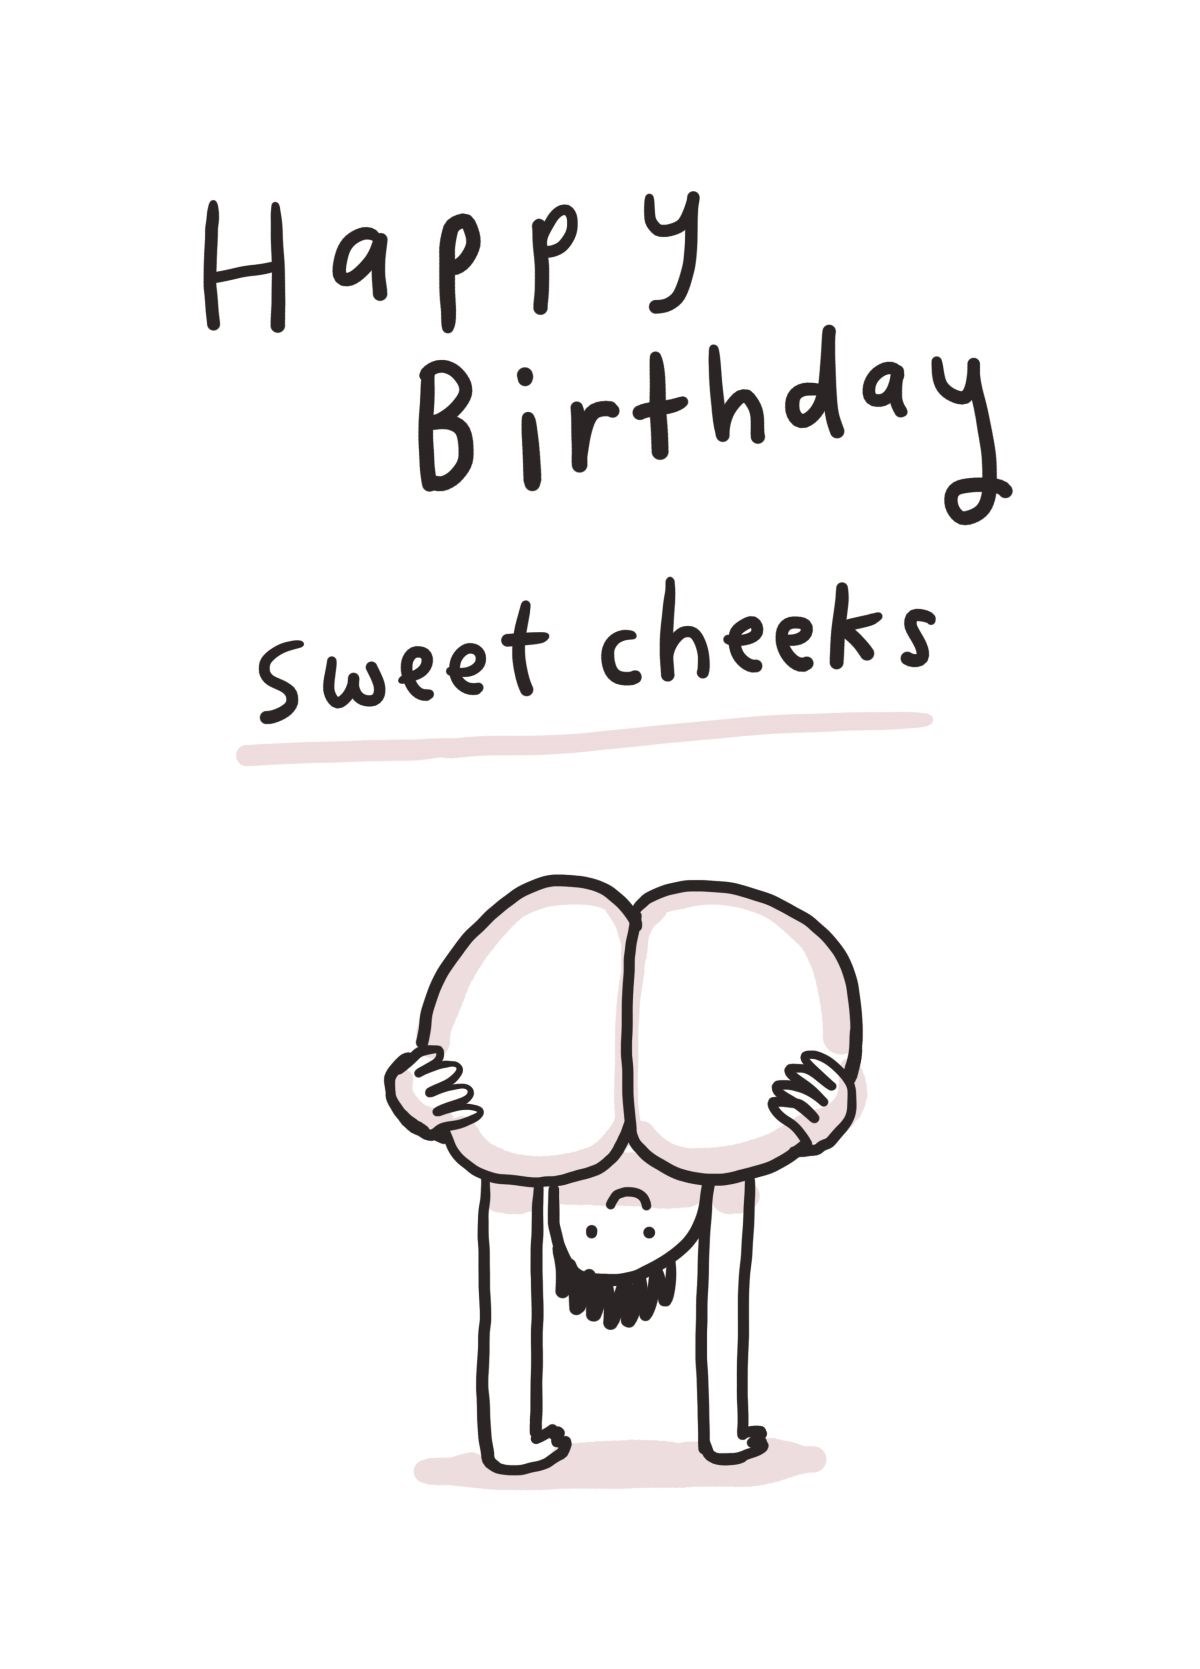 Rude and Cheeky Birthday Cards pic